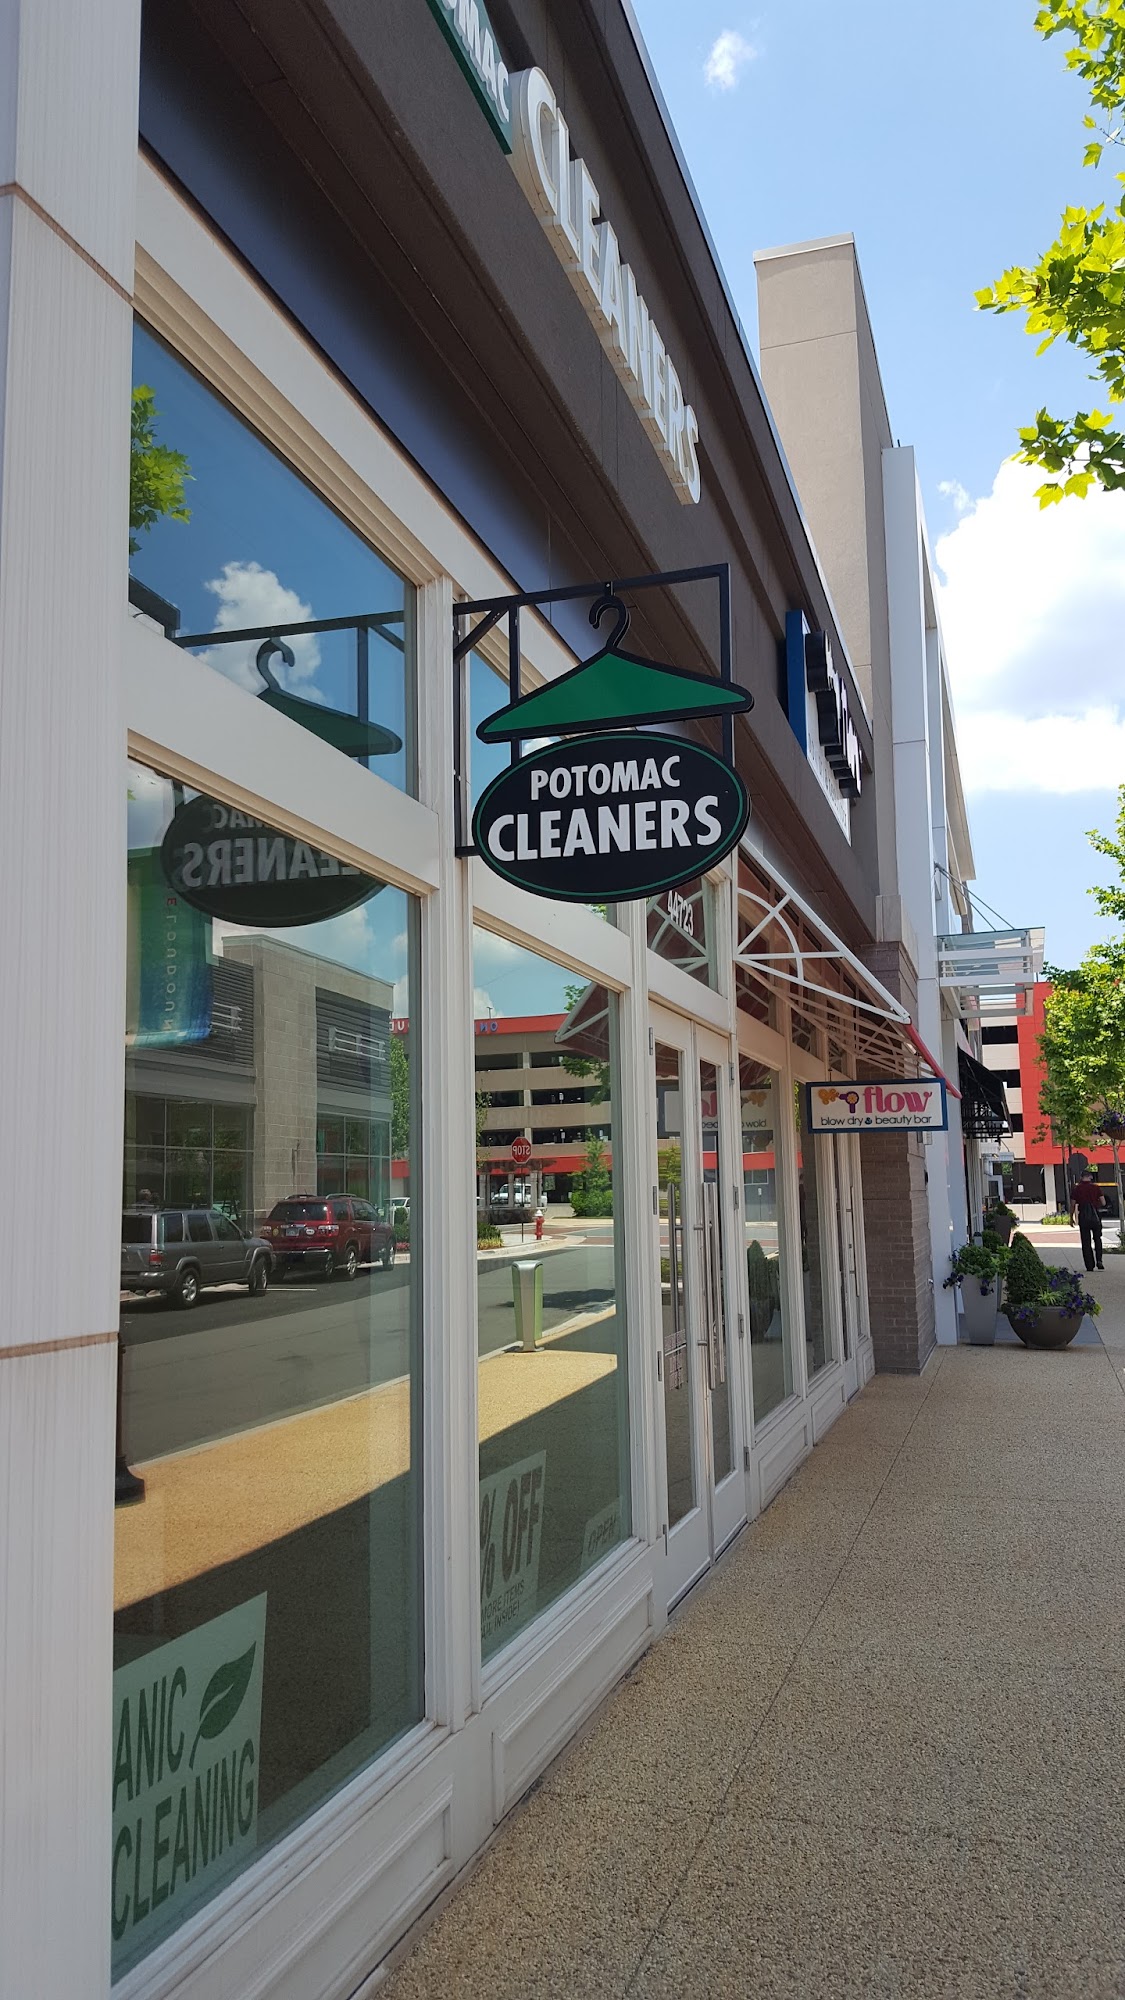 Potomac Cleaners